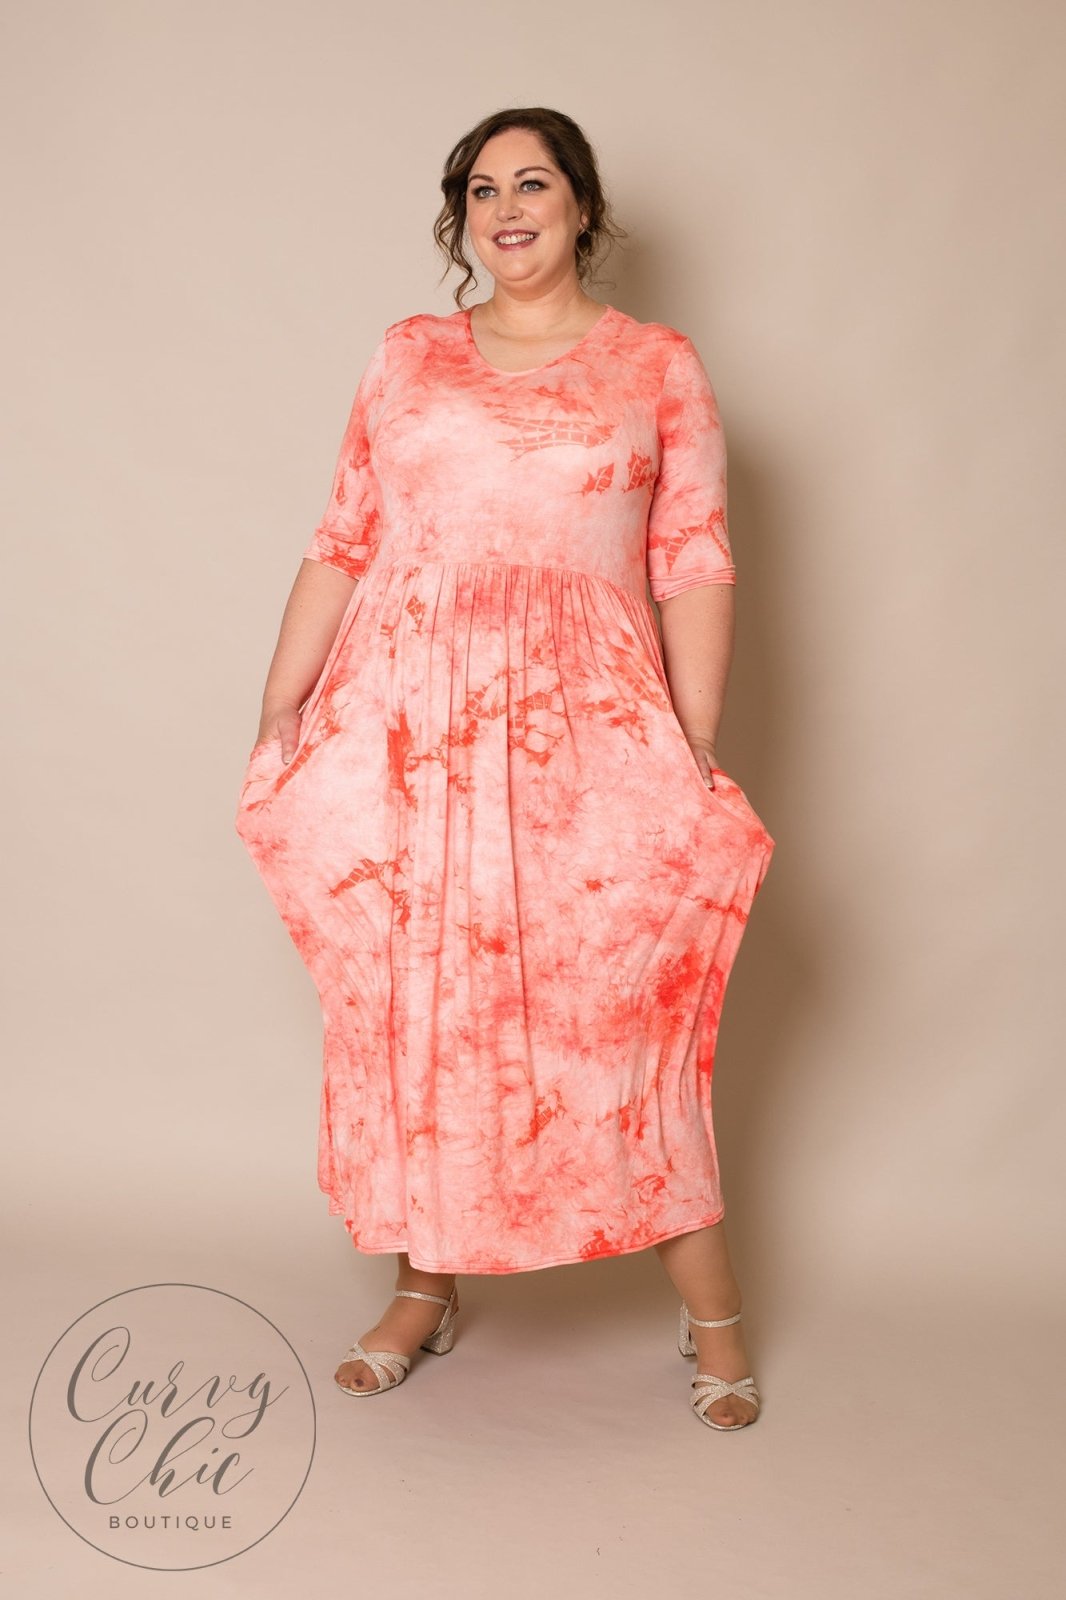 Tie Dye Stretchy Maxi Dress with pockets and sleeves - Curvy Chic Boutique